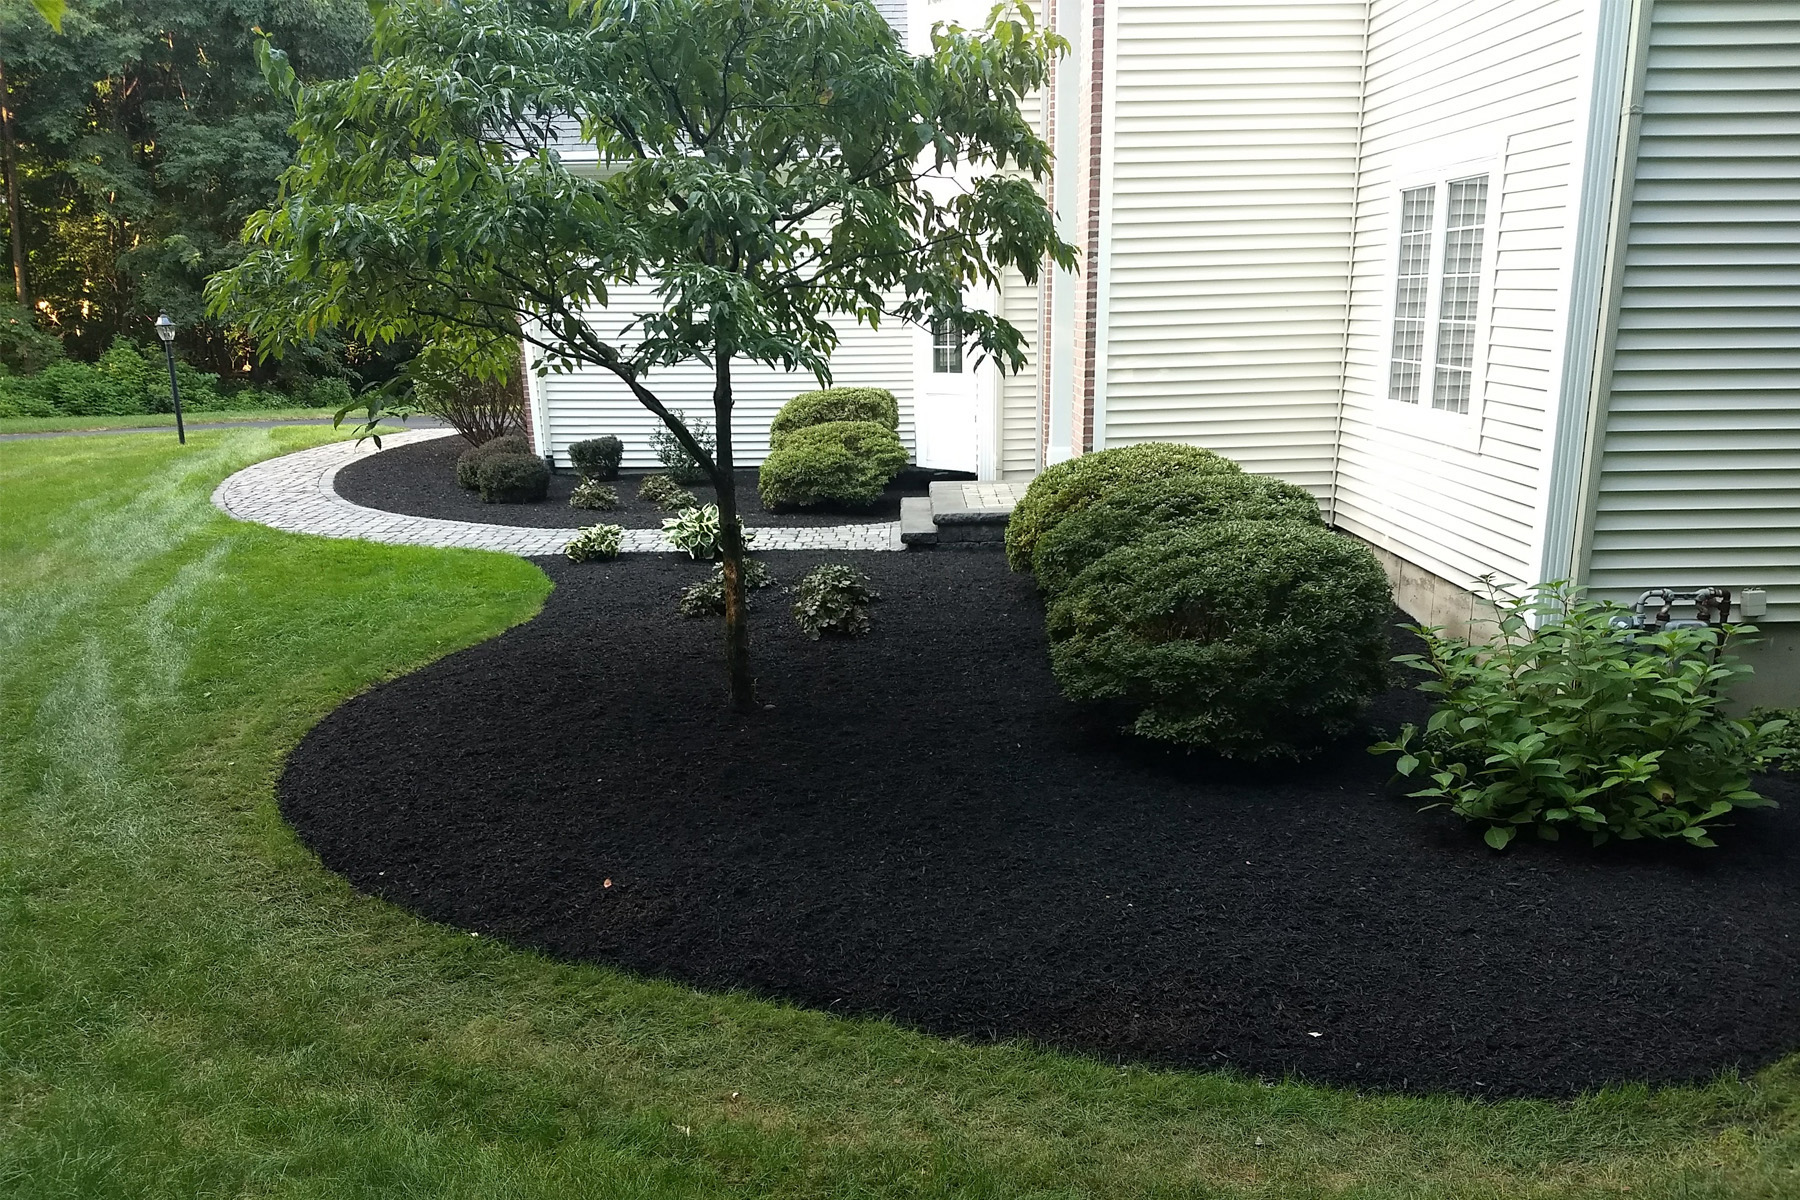 Thumbnail of completed trimming, bed cleanup, and fresh mulch